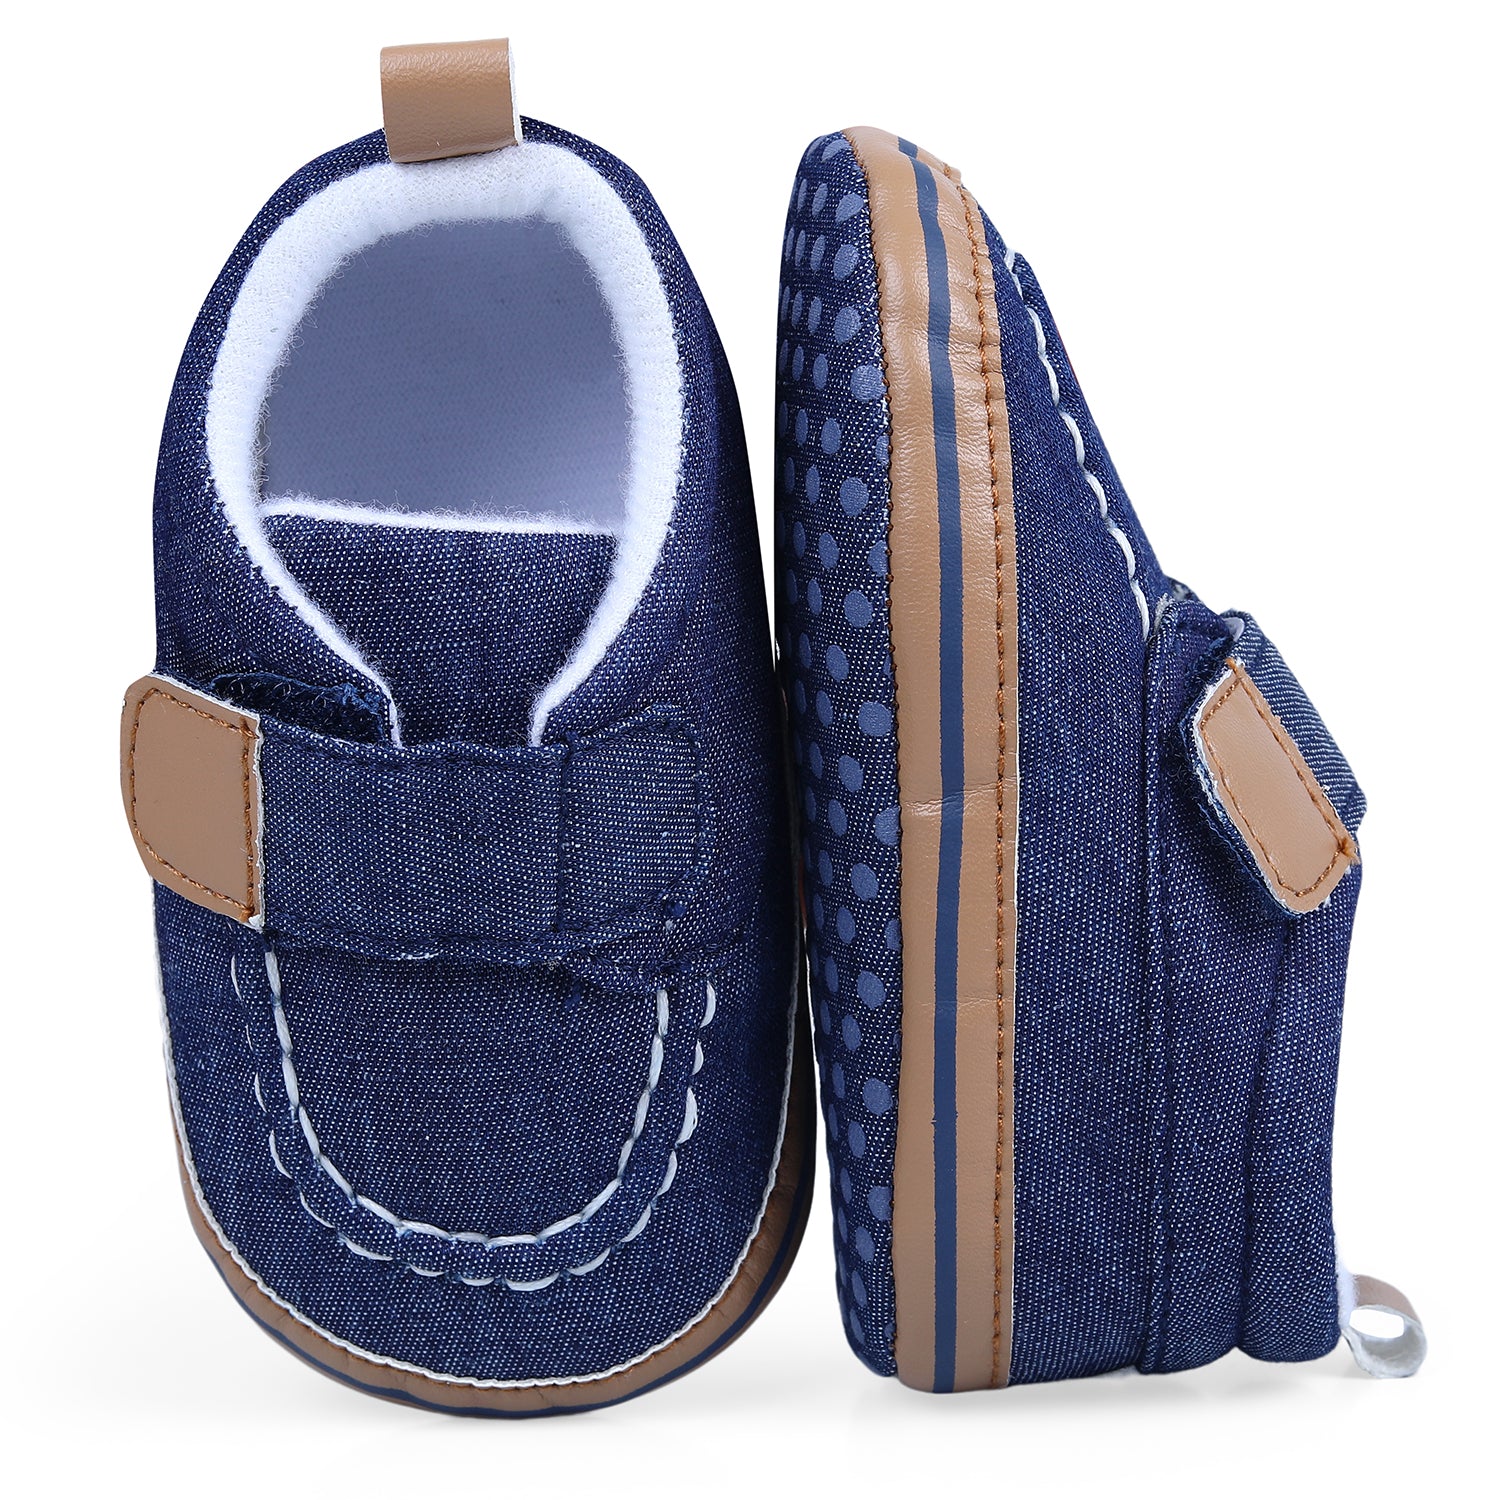 Solid Hookloop Stylish And Casual Denim Velcro Booties - Blue - Baby Moo